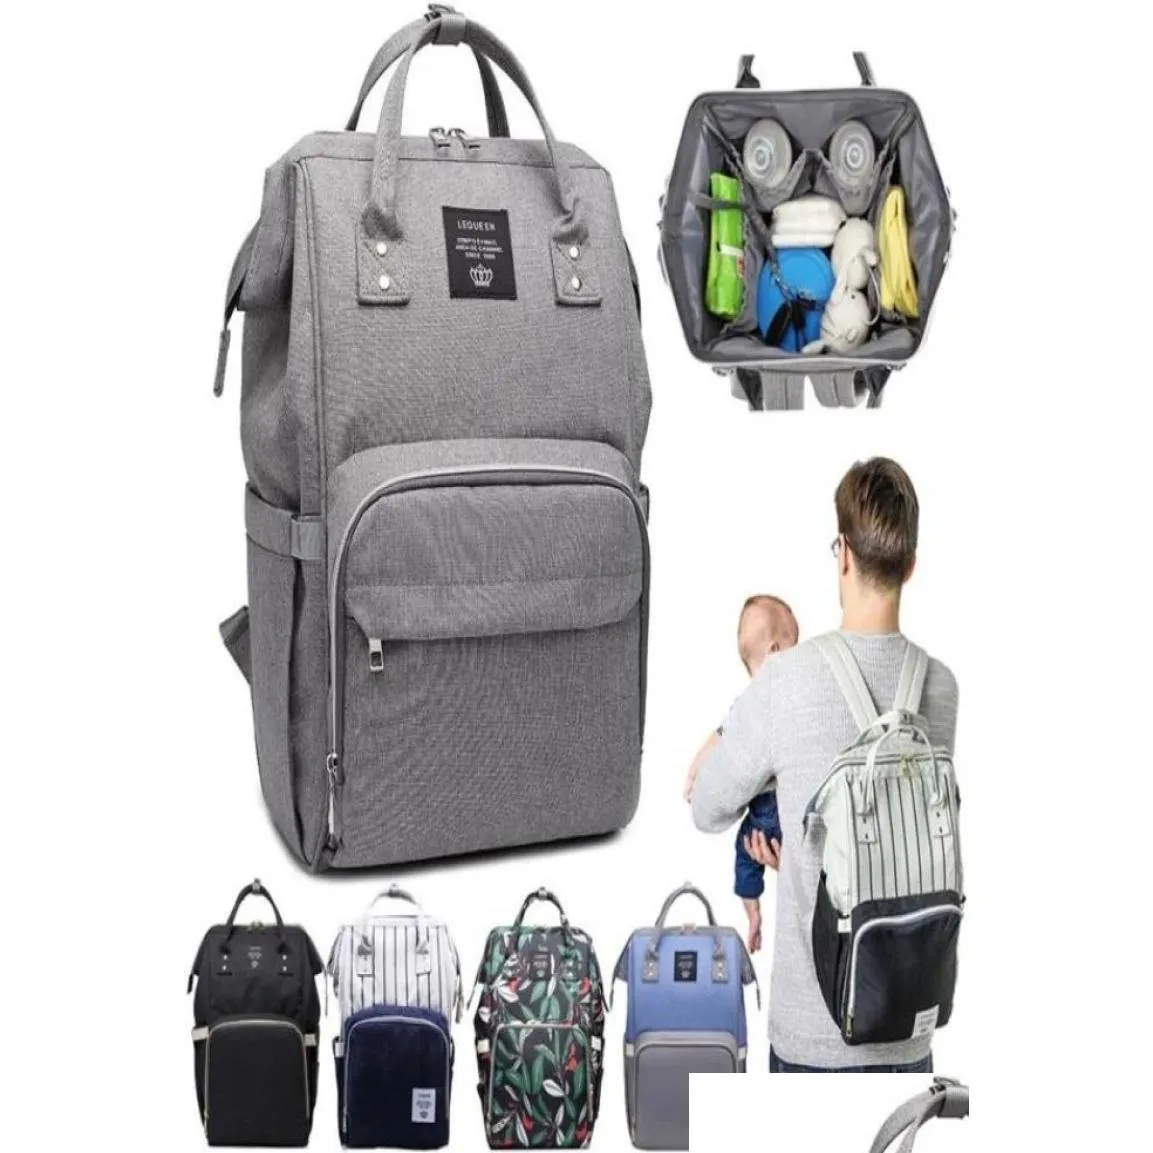 Diaper Bags Lequeen Bag Baby Waterproof Maternity Backpack For Mother Nursing Nappy Large Mommy Accessories Drop Delivery Kids Diape Otcf4